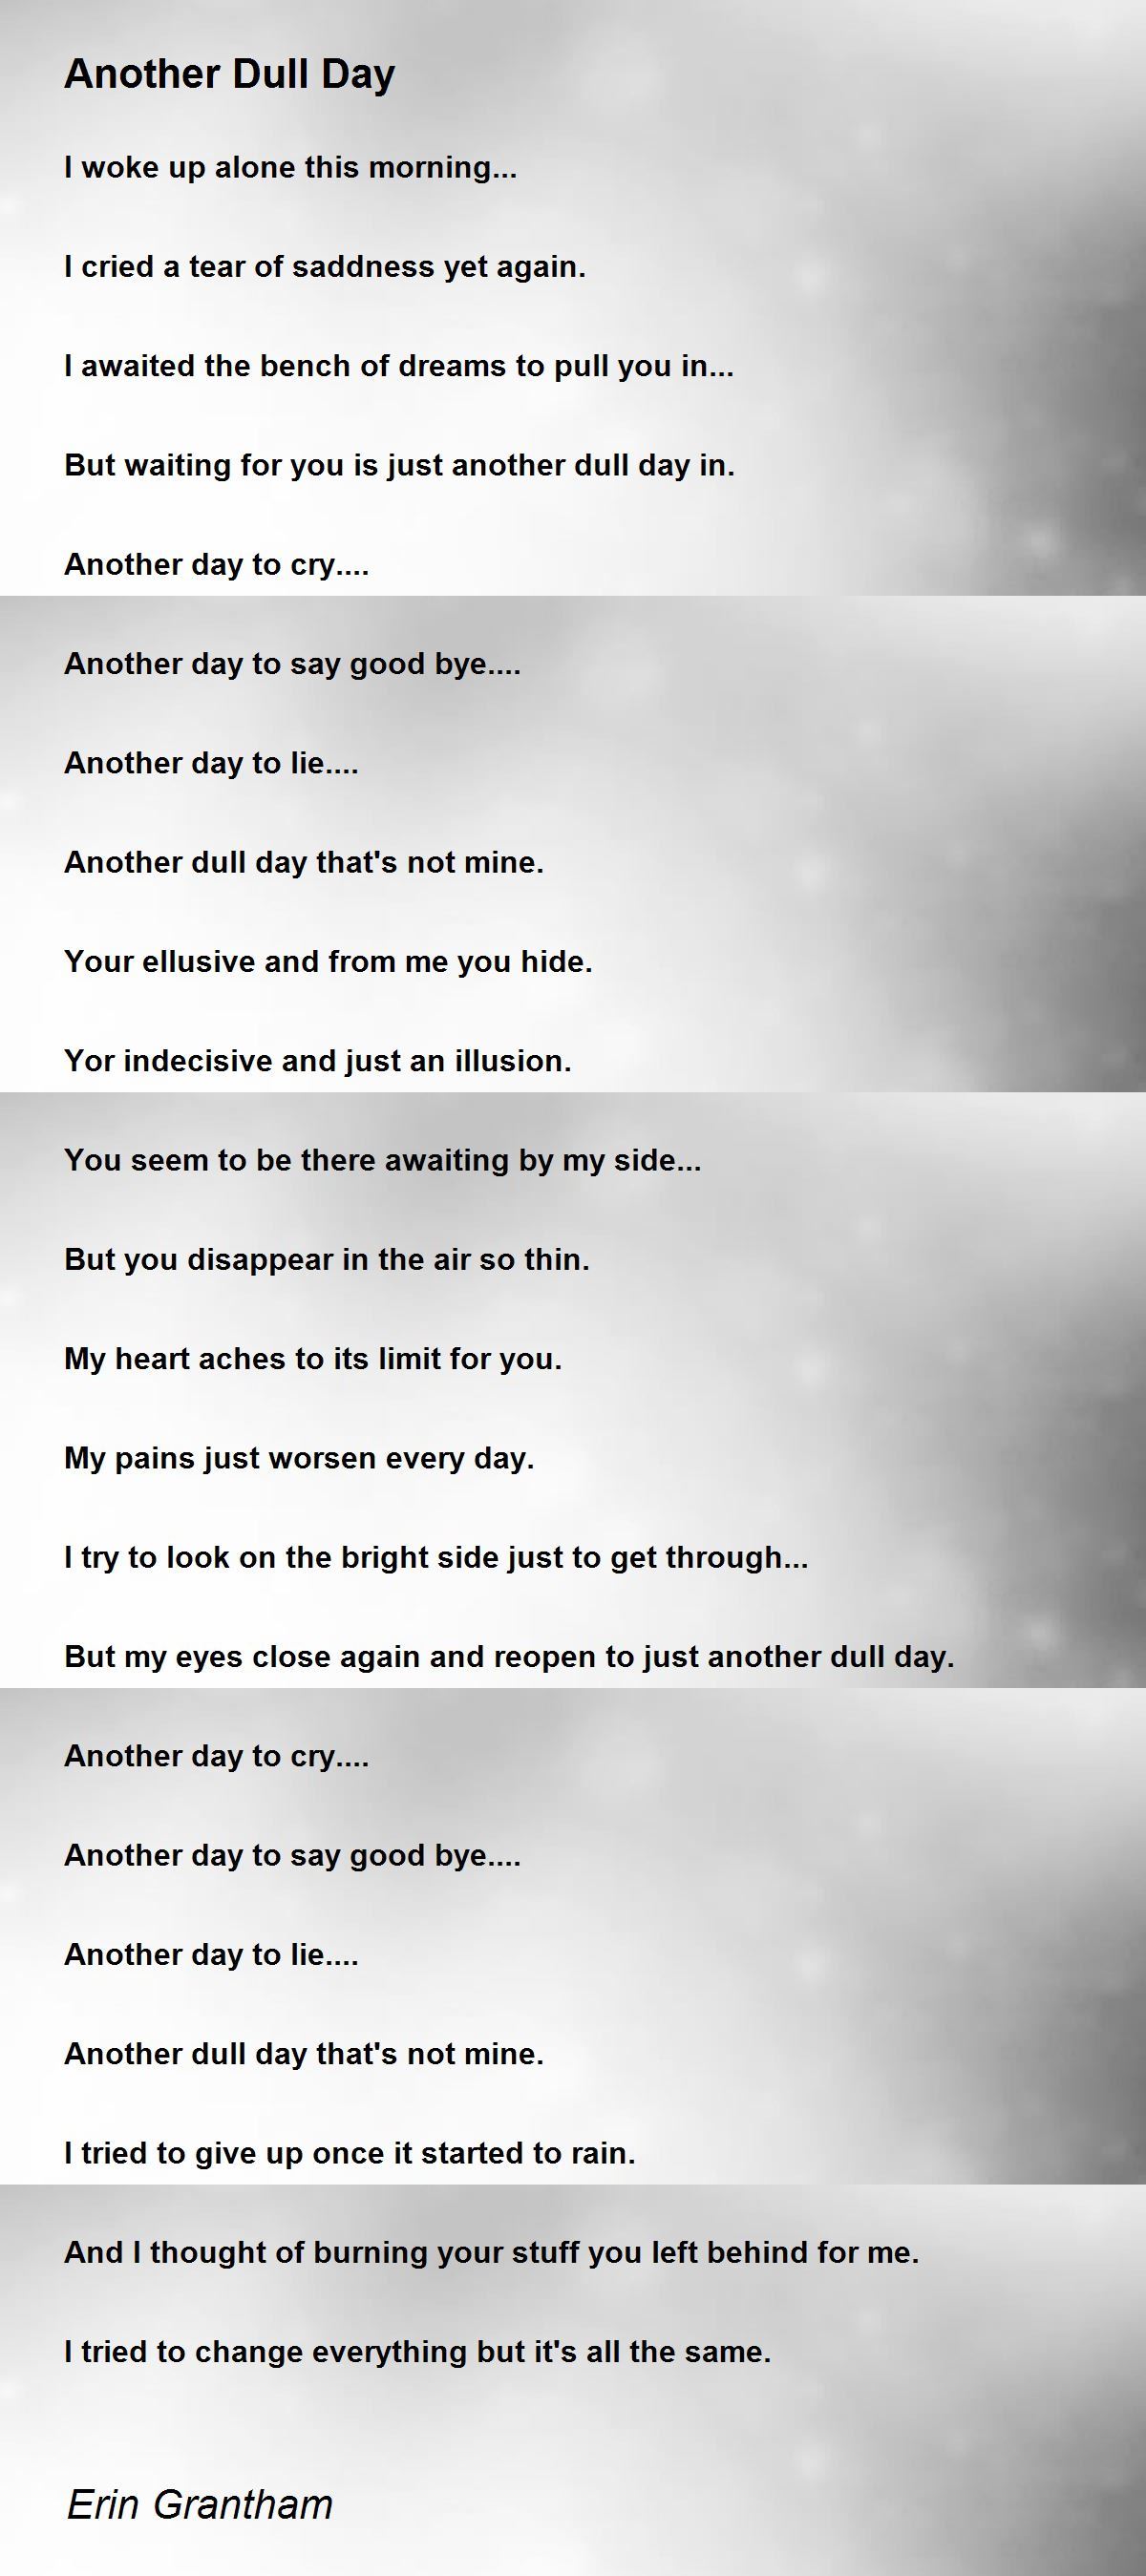 Another Dull Day by Erin Grantham - Another Dull Day Poem